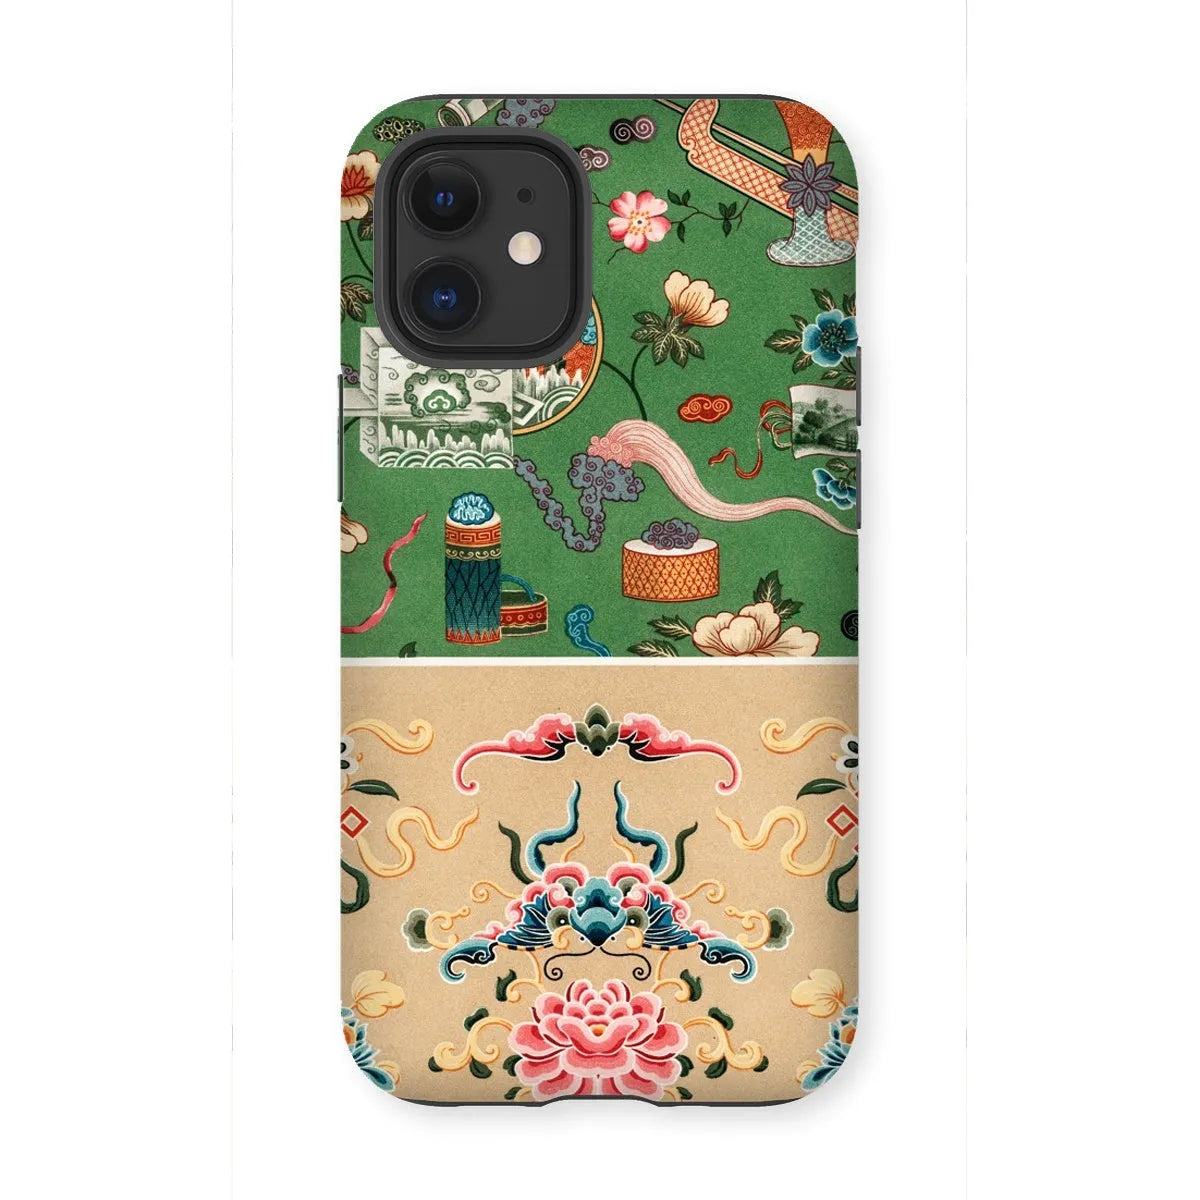 This Chinese Pattern By Auguste Racinet Tough Phone Case - Iphone 12 Mini / Matte - Mobile Phone Cases - Aesthetic Art